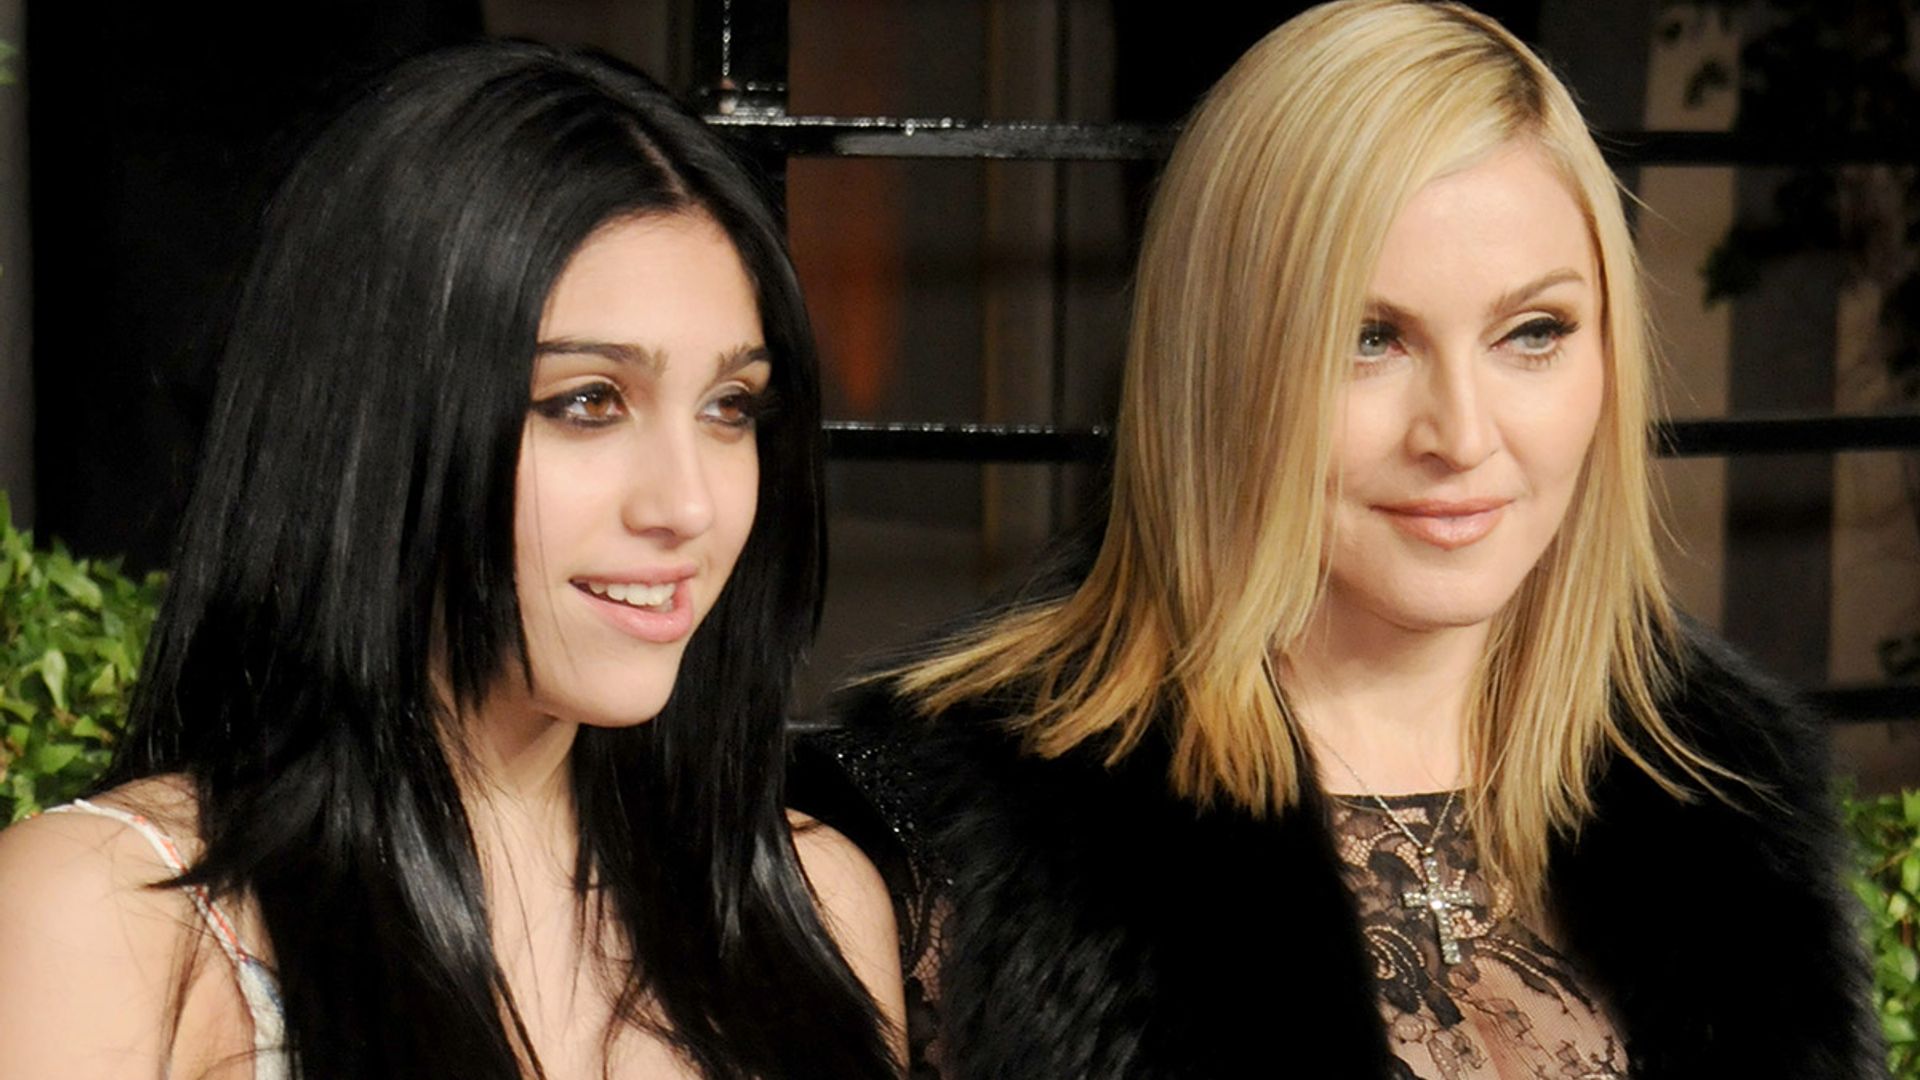 Madonna's daughter Lourdes Leon dons cut-out dress for seriously unexpected photo